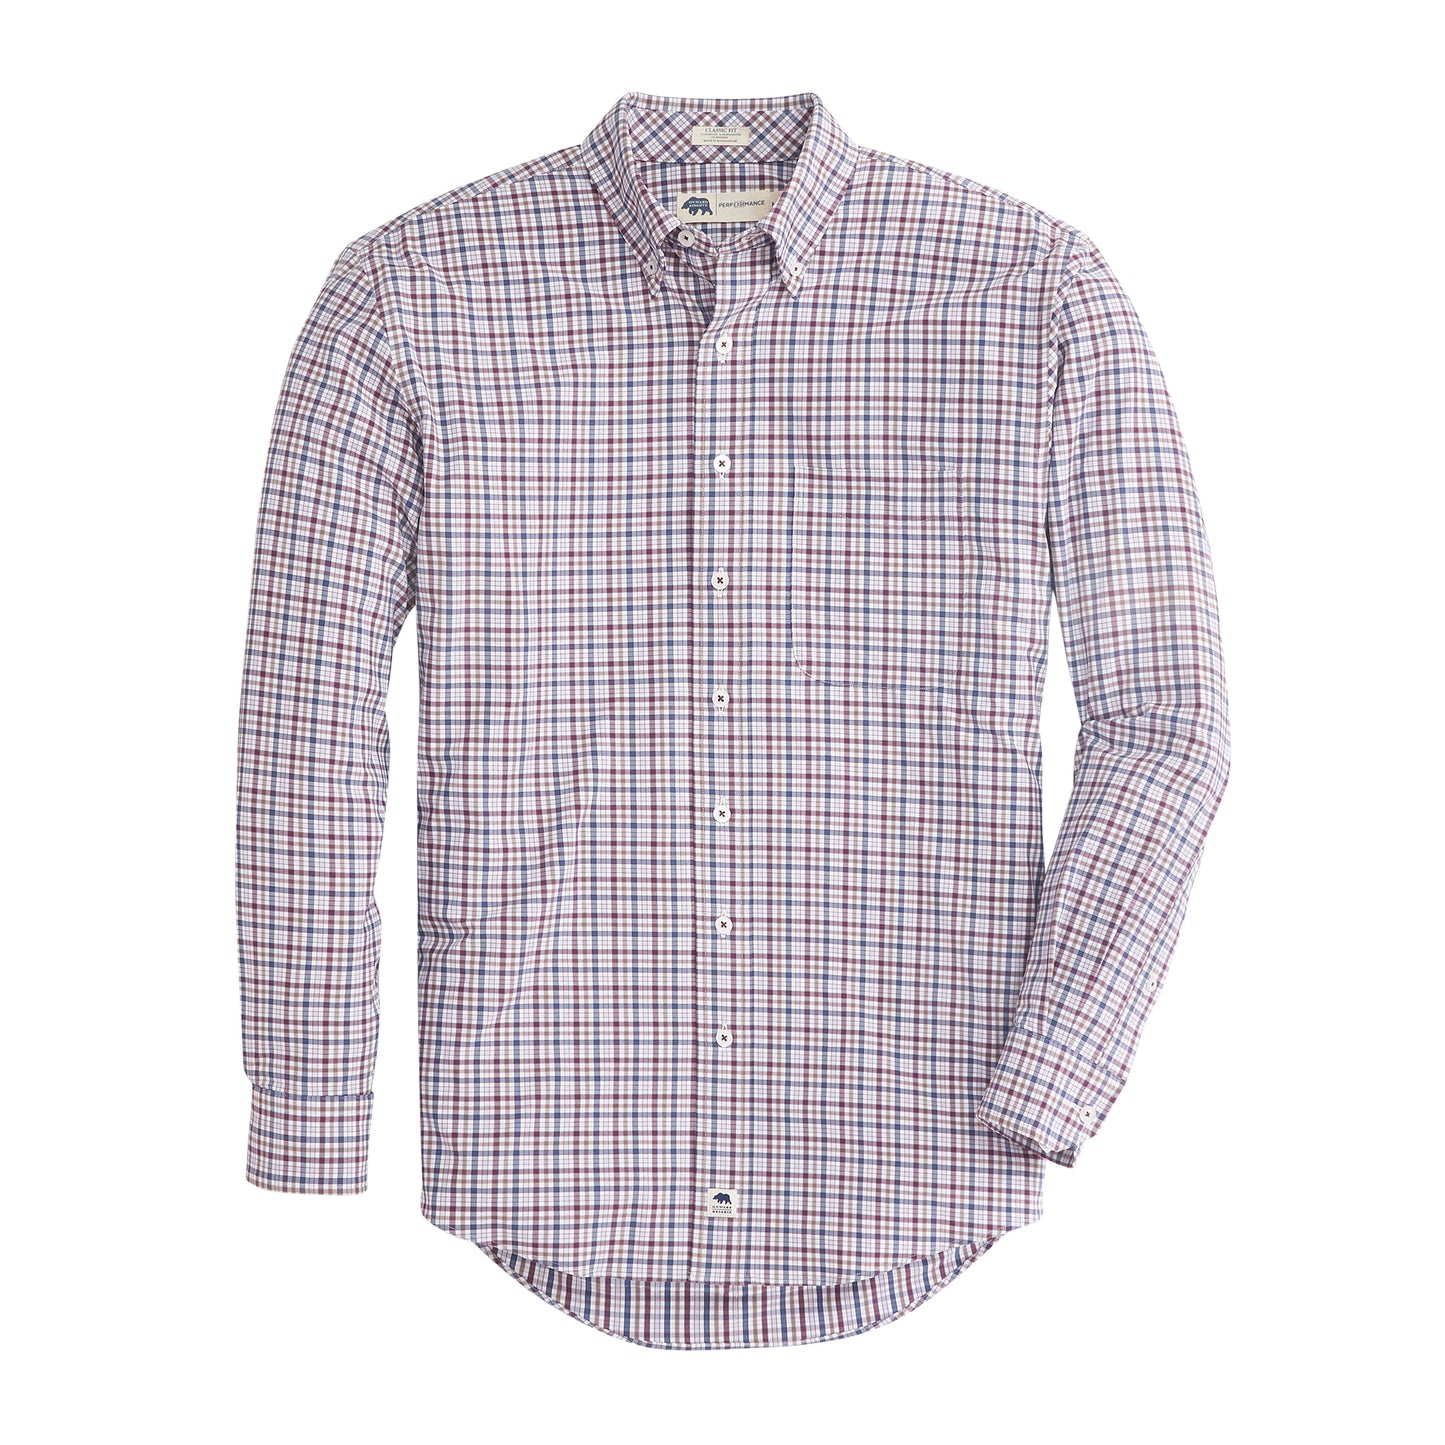 Mammoth Classic Fit Performance Twill Button Down